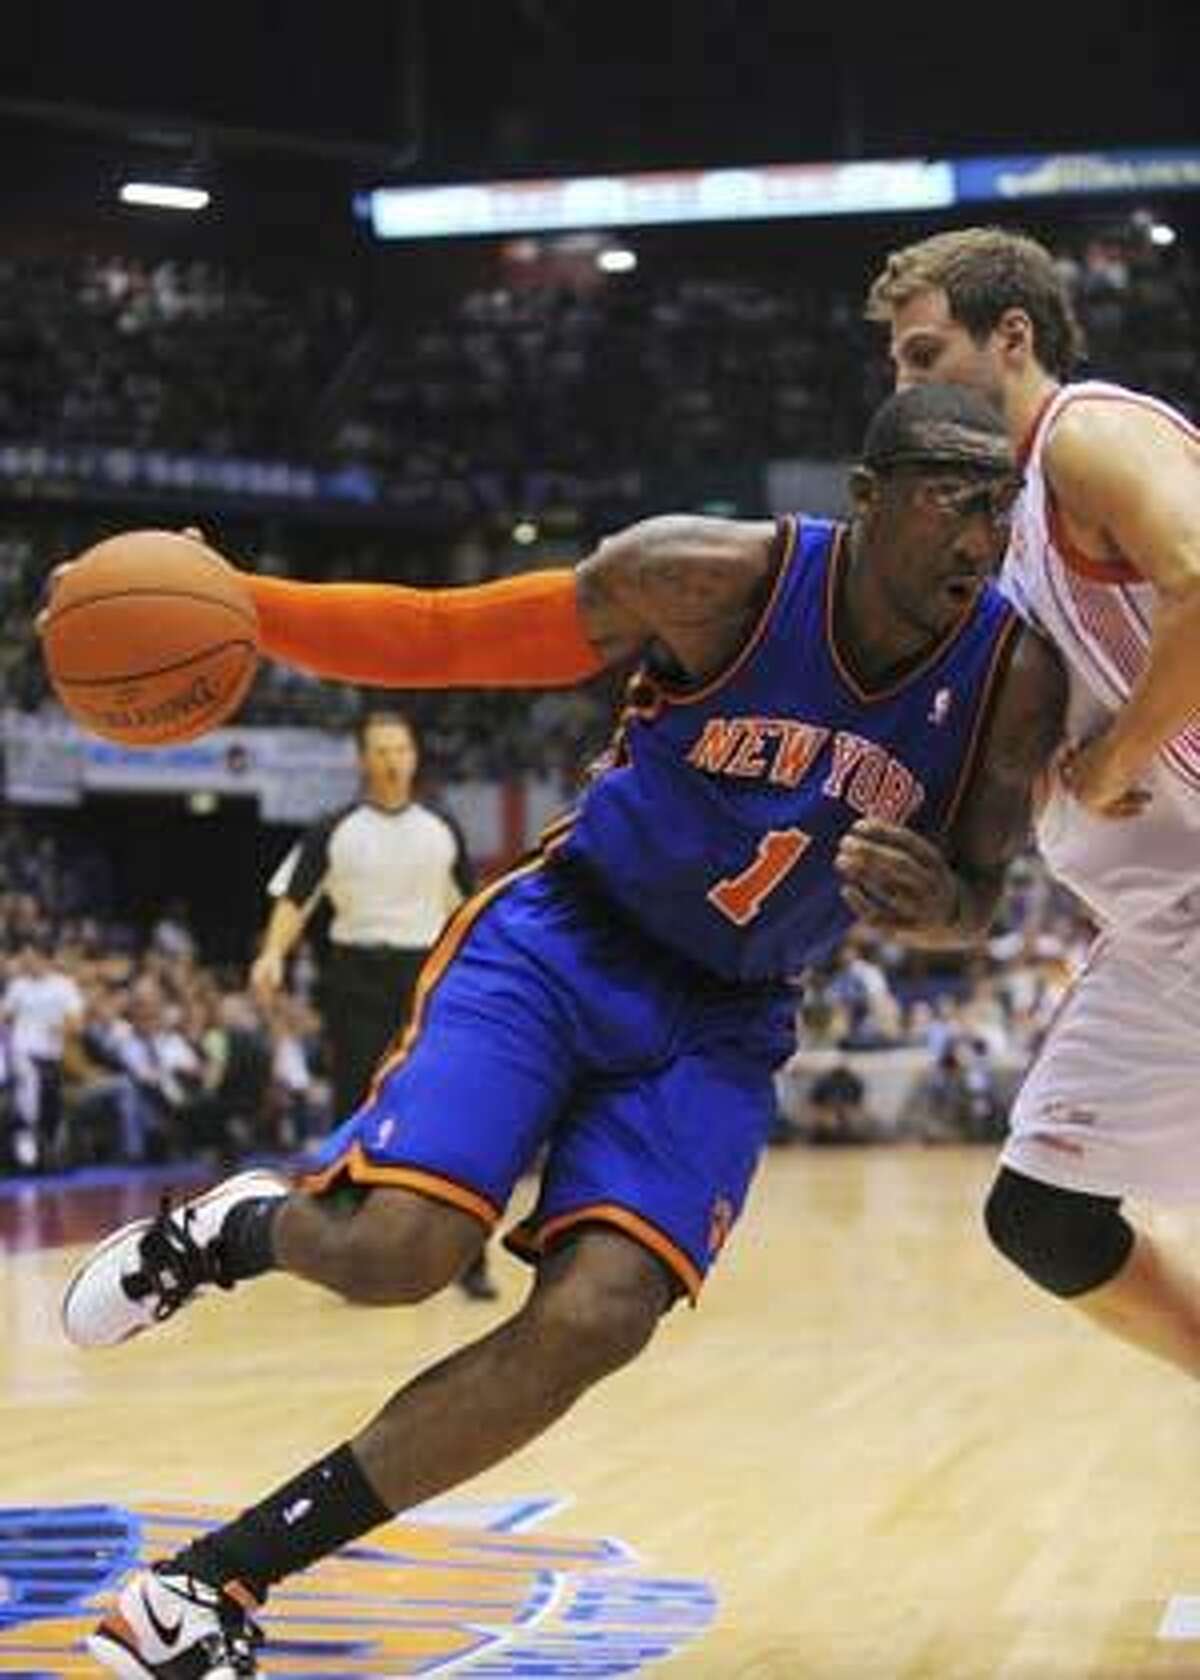 New York Knicks forward Amar'e Stoudemire in action during the New York Knicks' preseason opener against Italian team Olimpia Milano. in Milan, Italy, Sunday, Oct. 3, 2010. (AP Photo/Claudio Scaccini)